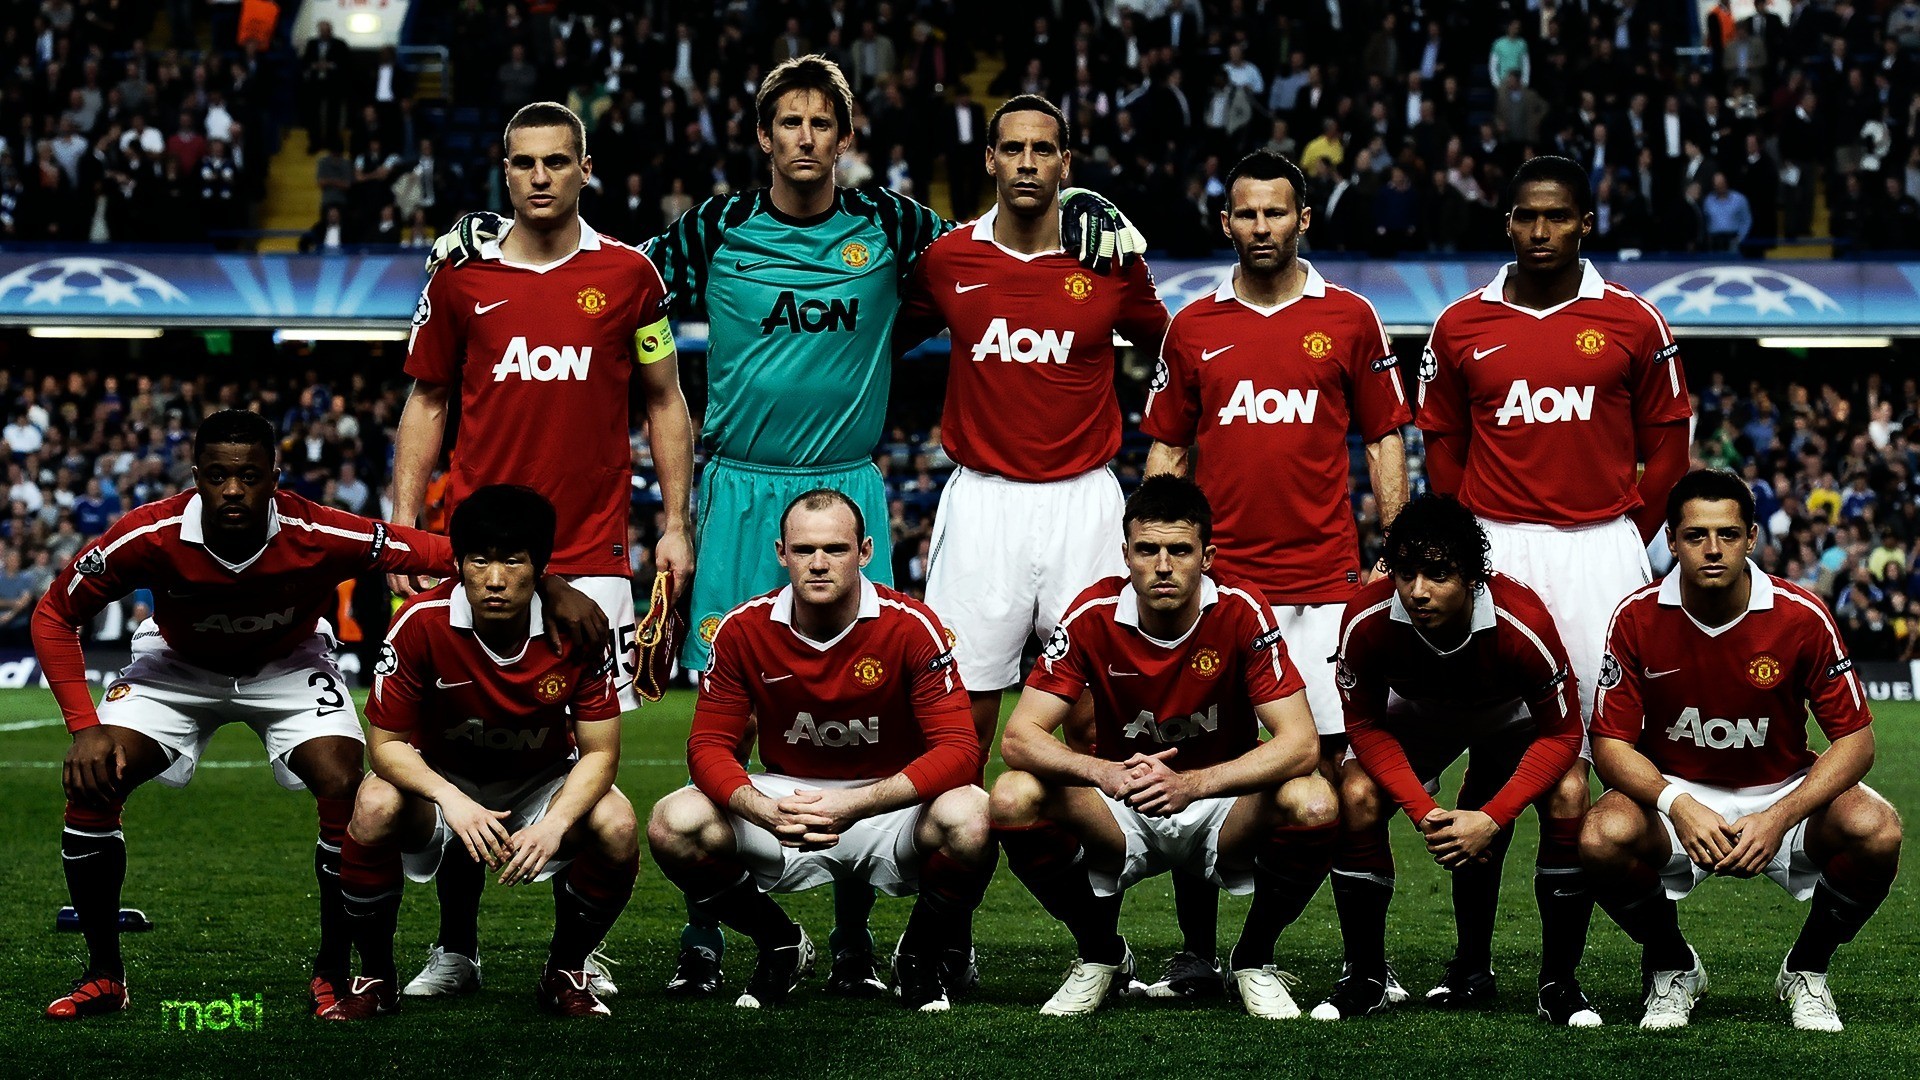 Manchester United Players Hd - 1920x1080 Wallpaper 